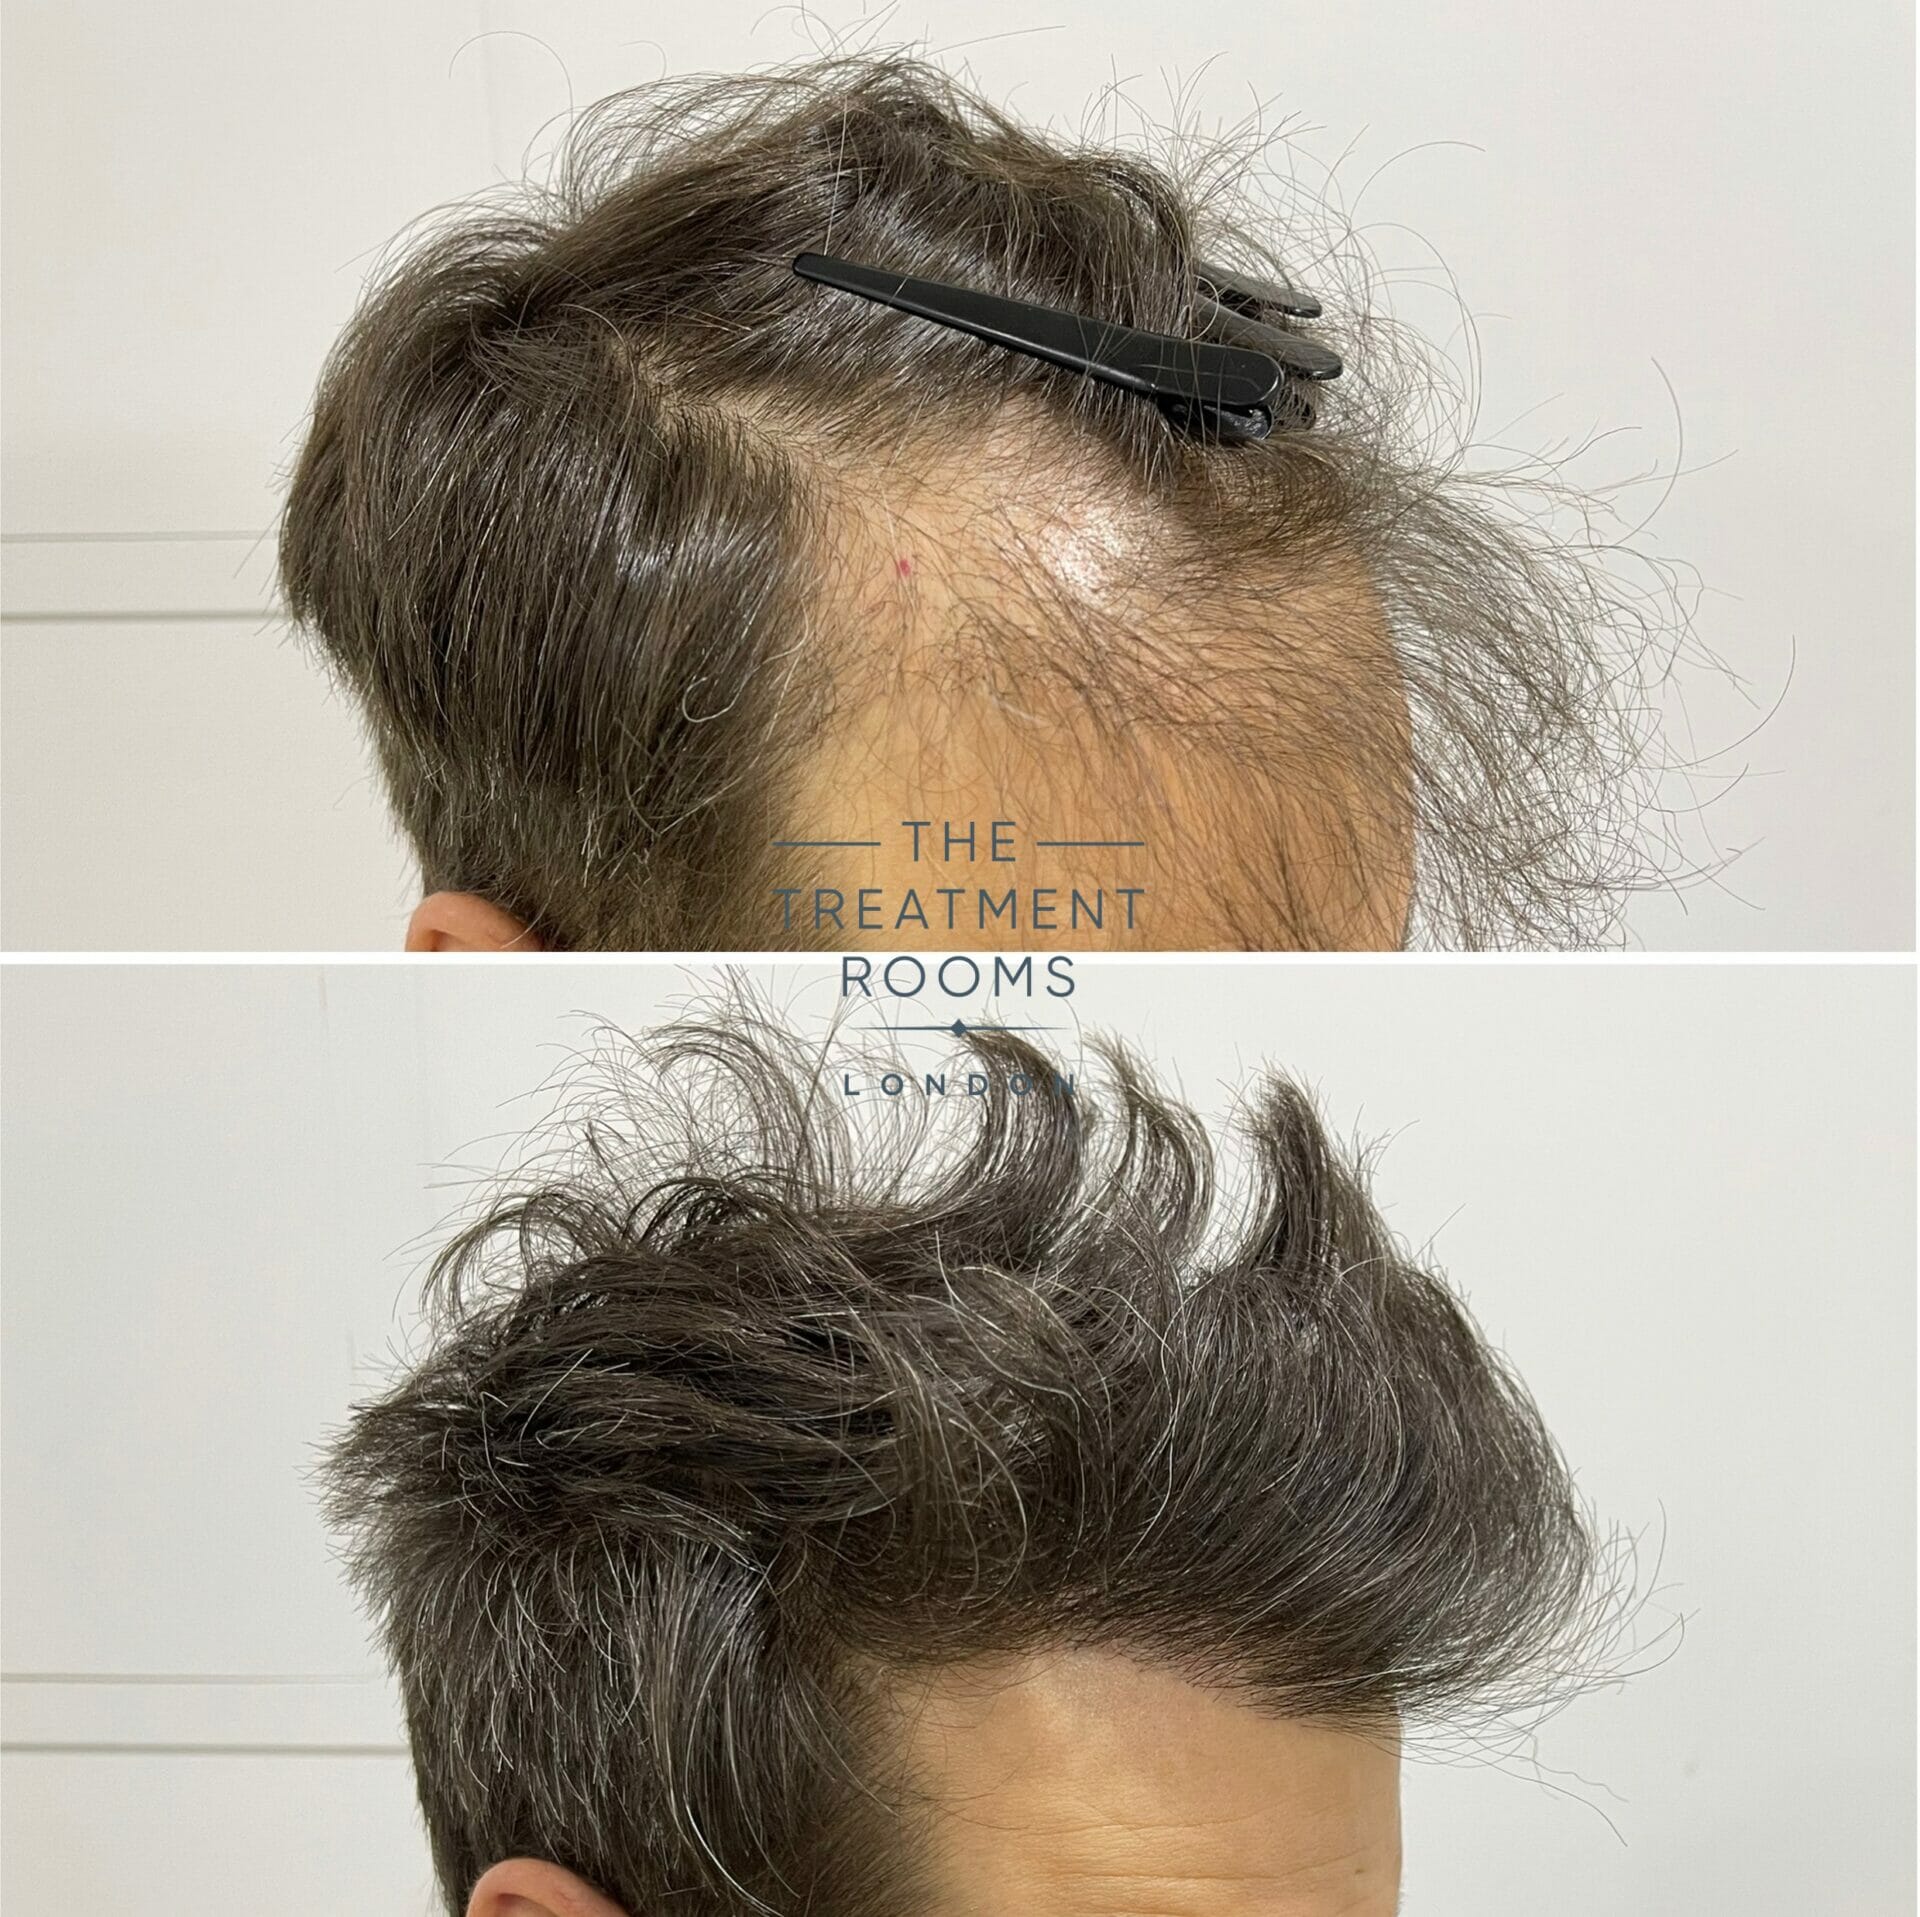 Repair FUE hair transplant before and after